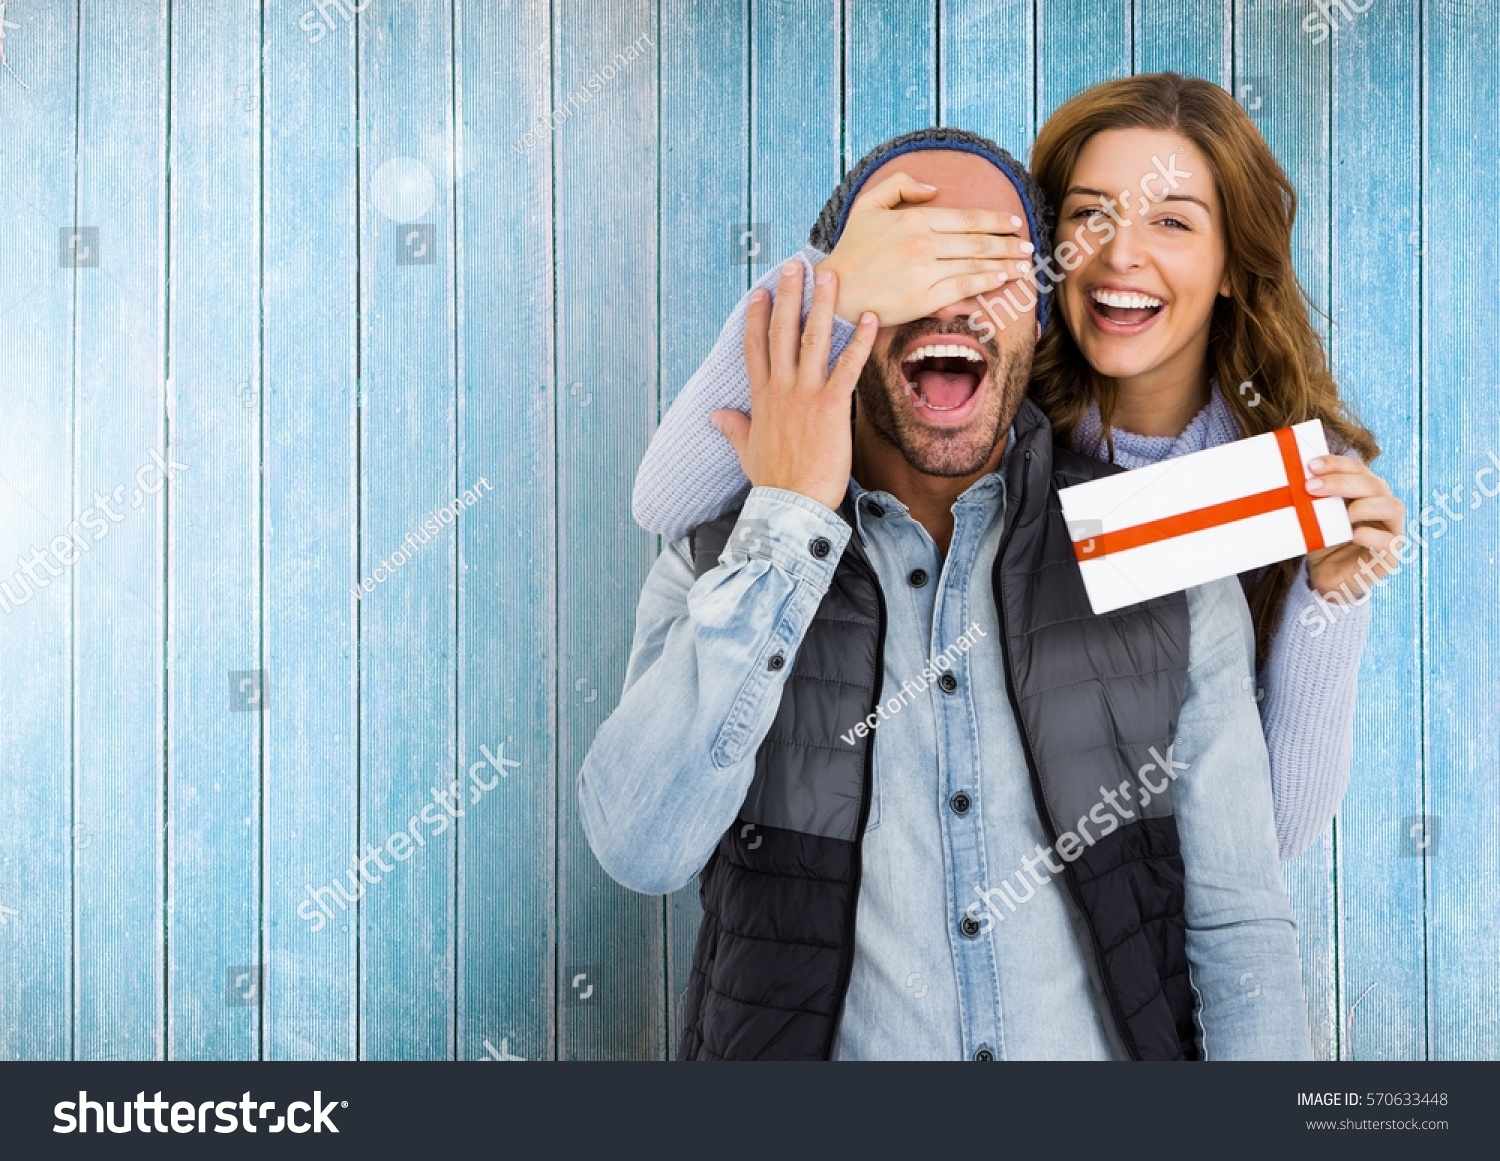 Woman giving surprise gift to man against wooden background #570633448